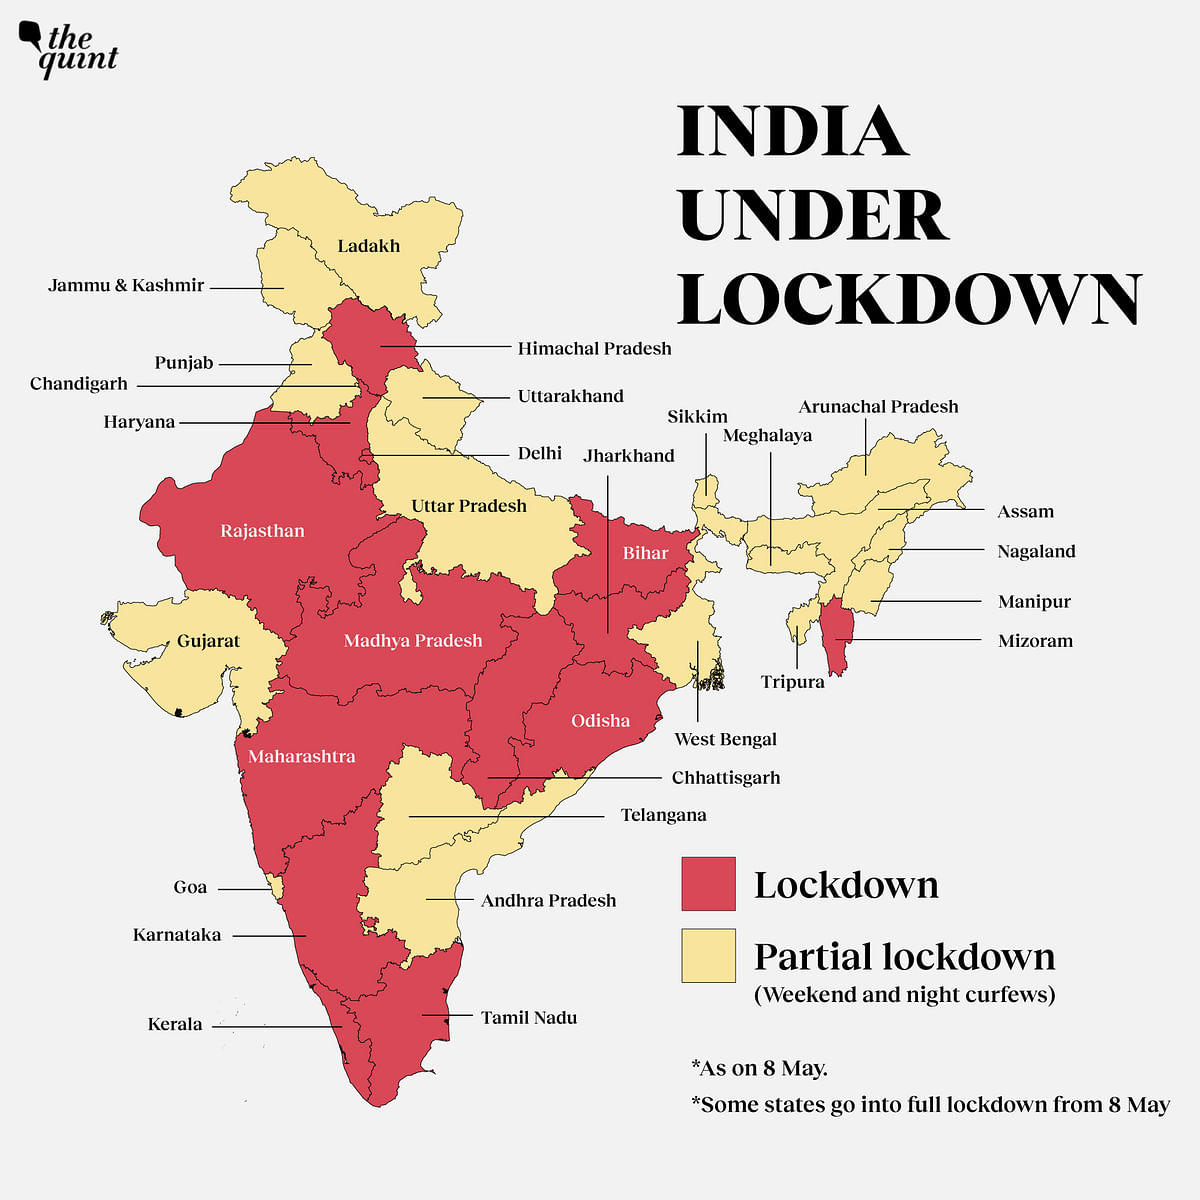 While the country has not gone into nationwide lockdown, however, many regions are under complete lockdown.